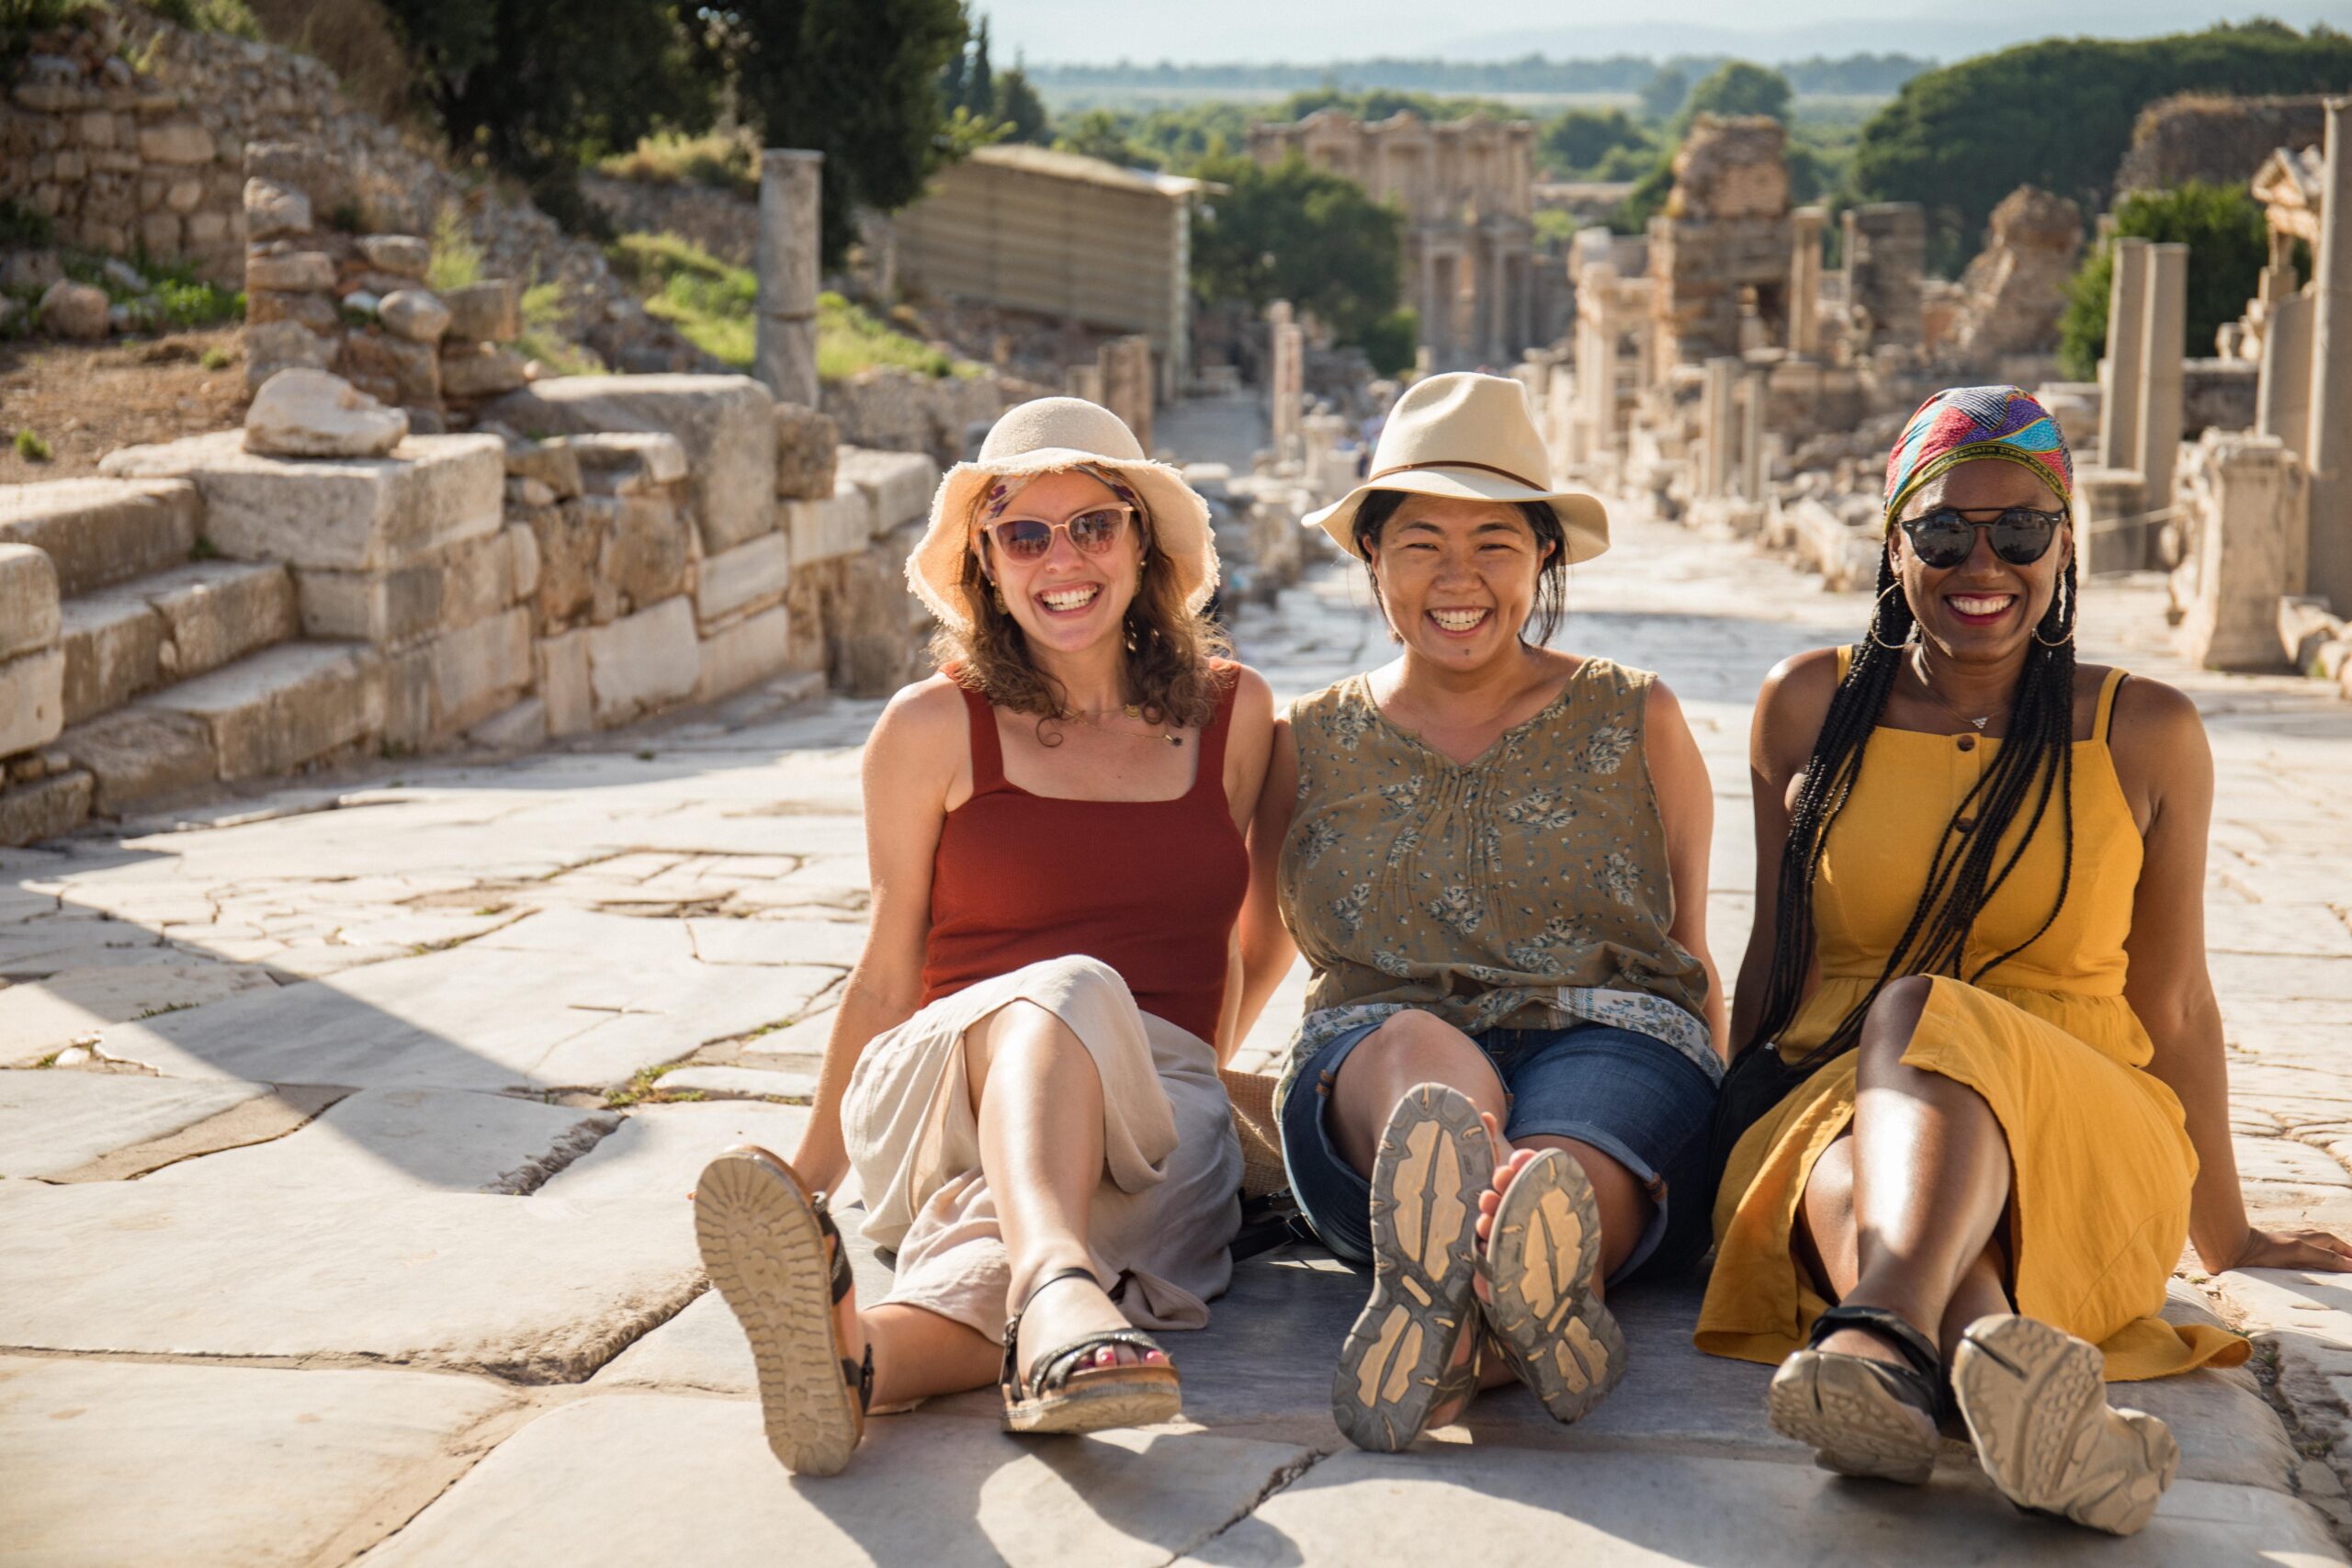 three women sitting down in an open air ruin site. Three women smiling towards the camera